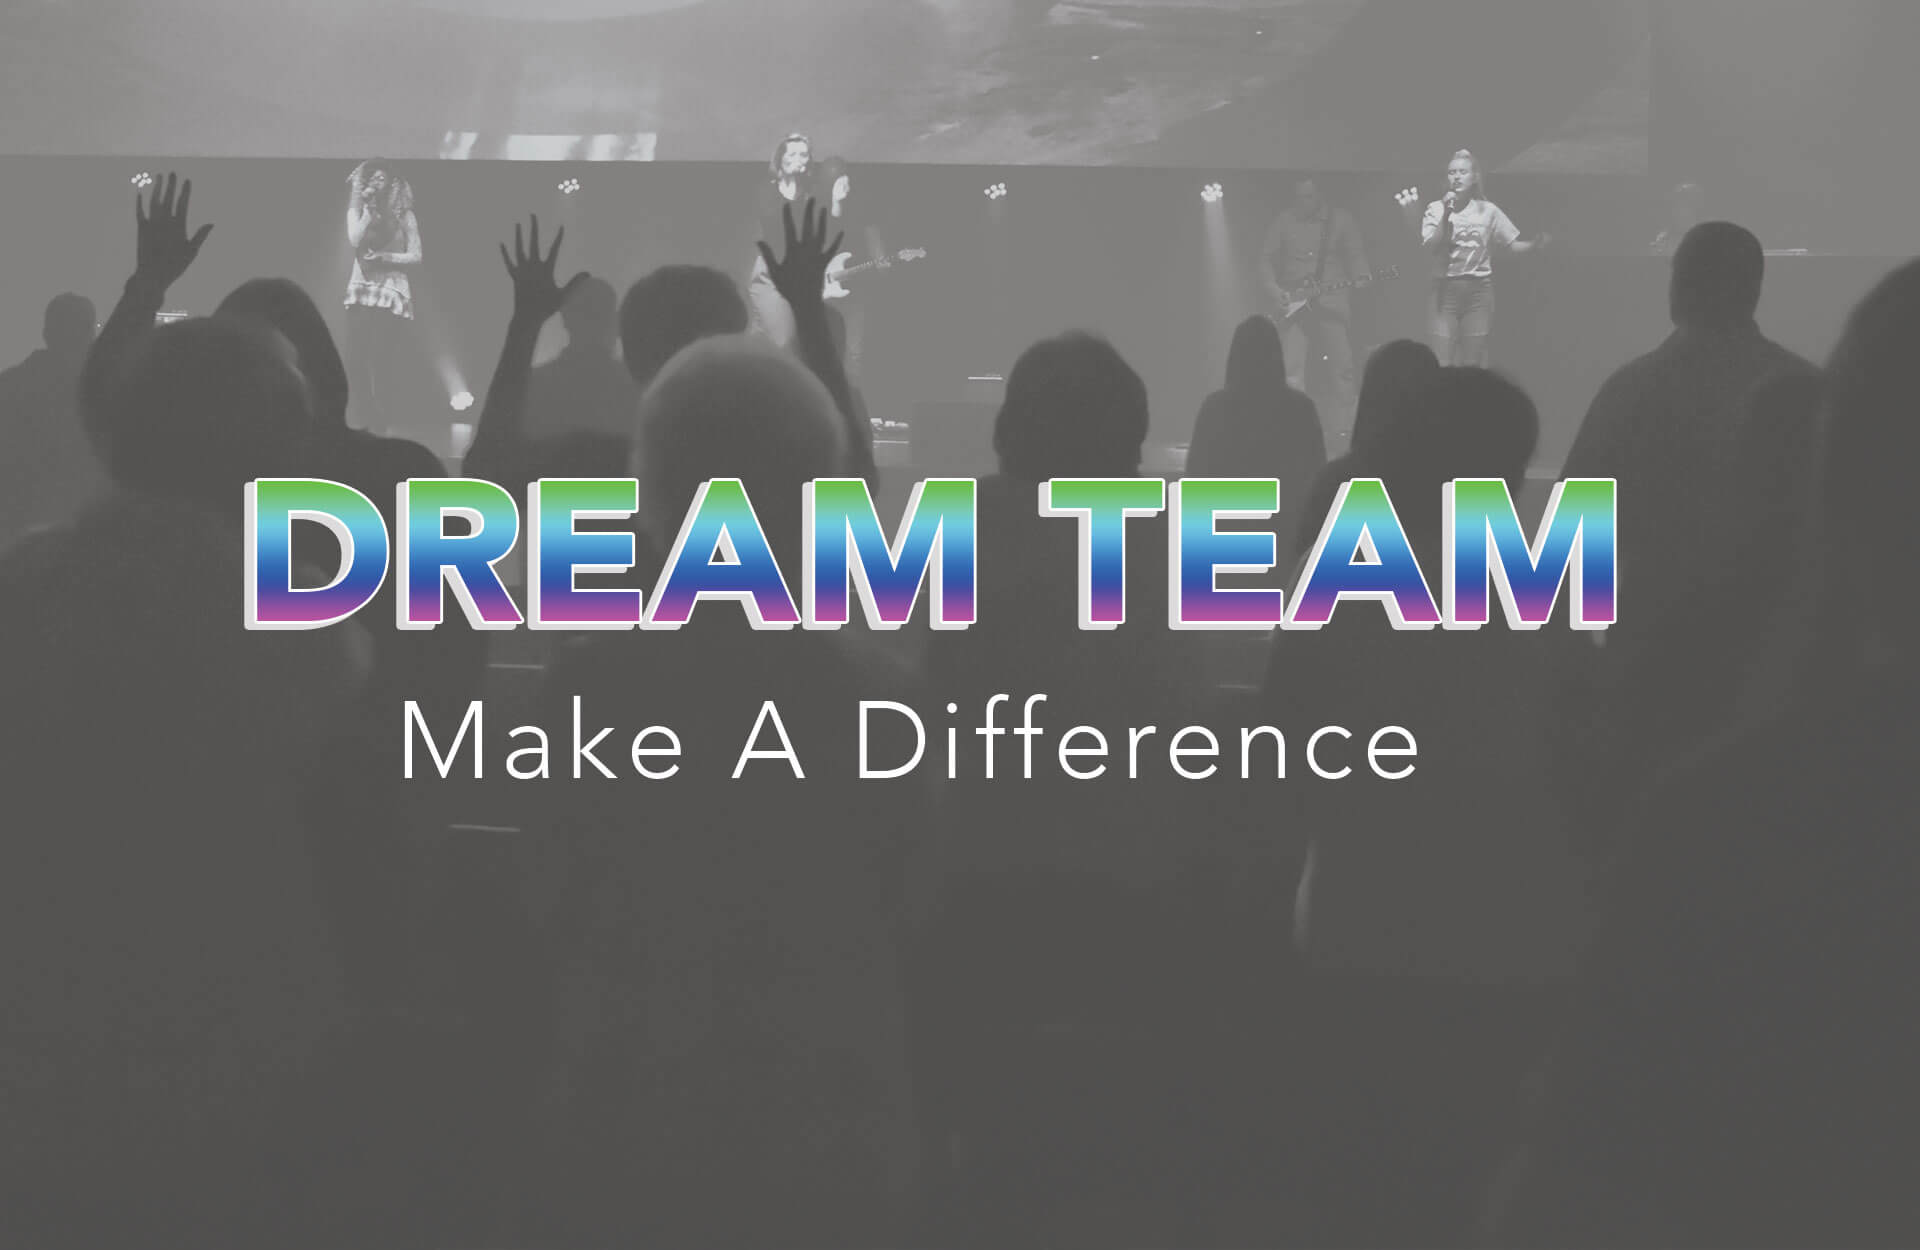 Audience raising hands at an event with "dream team make a difference" text overlay.